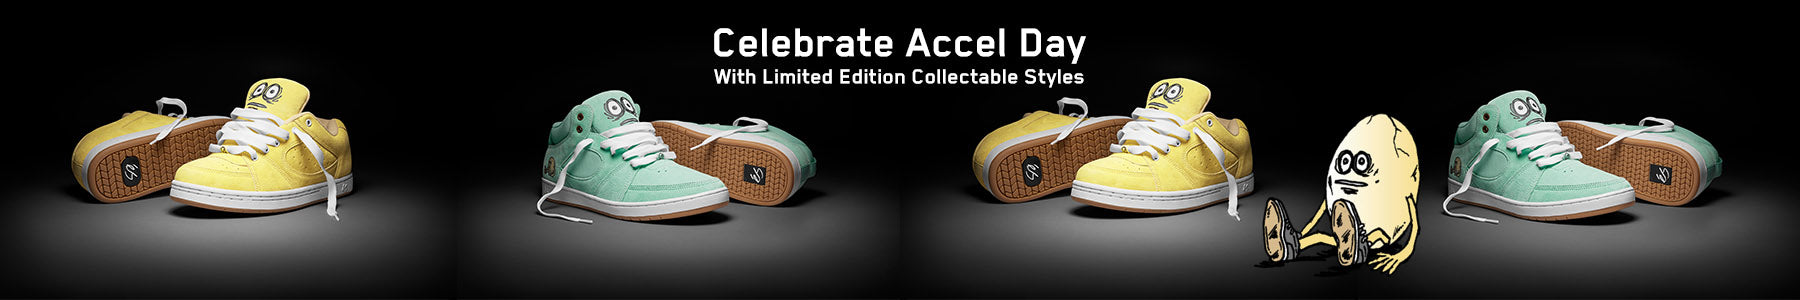 ACCEL COLLECTION